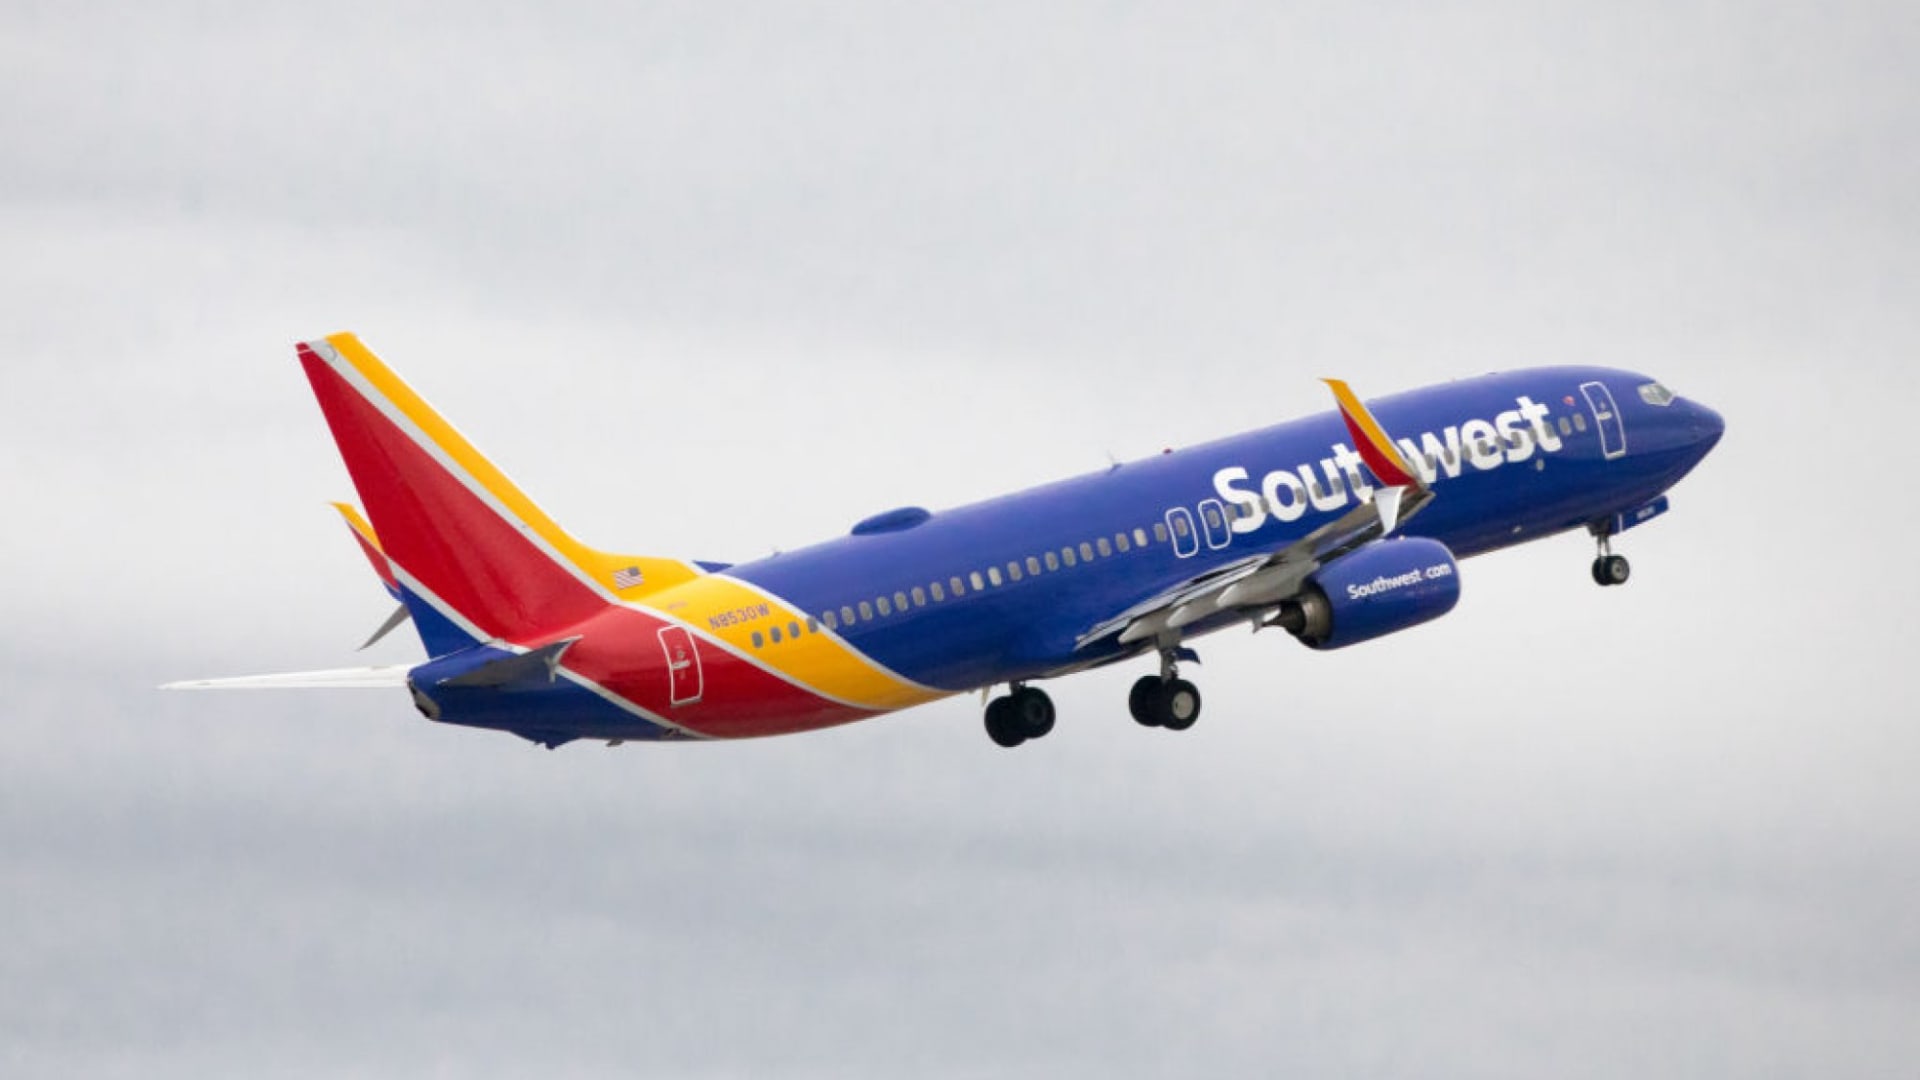 On This Southwest Airlines Flight, Almost Everything Went Wrong. The Company's Response Is the Best I've Seen Yet